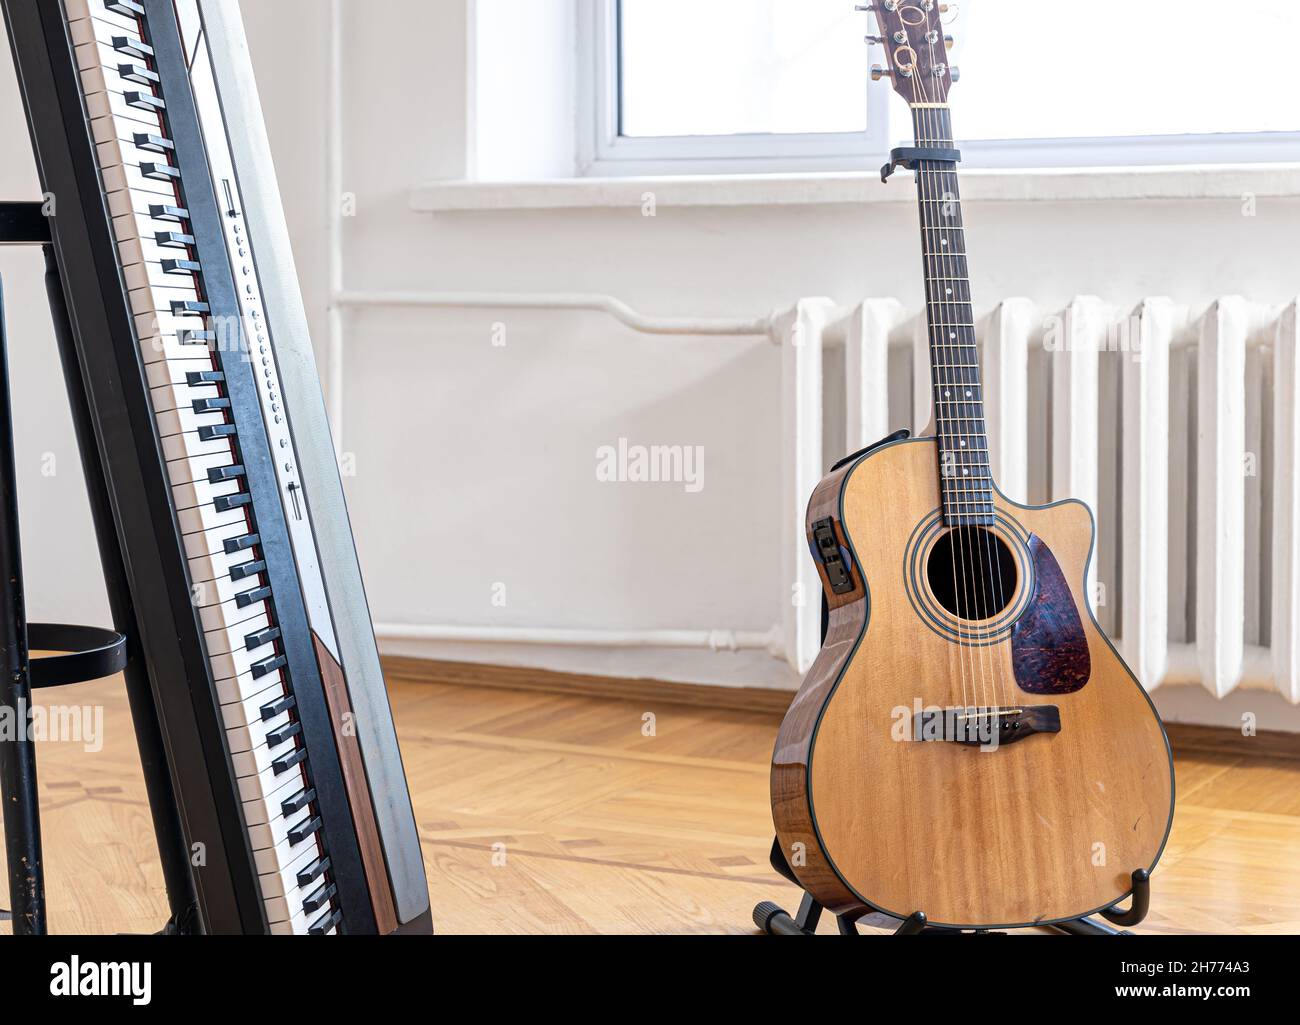 Piano keys and acoustic guitar in the interior of a bright room Stock Photo  - Alamy